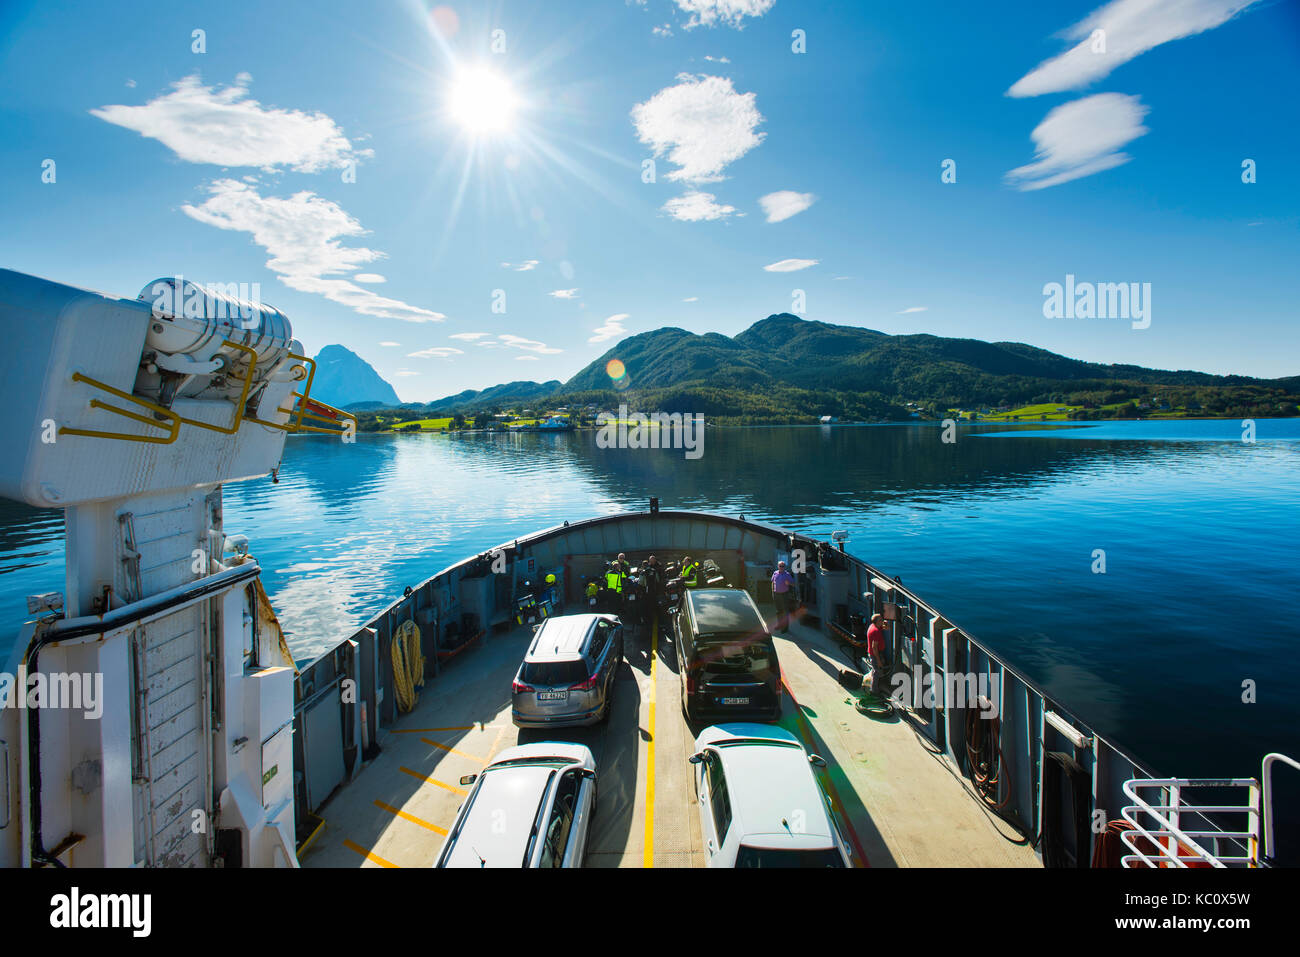 Kystriksveien - the coastal route along the Nordland coastline in Norway. Image taken on the Agskardet - Foroy ferry  as it is docking at Agskardet. Stock Photo